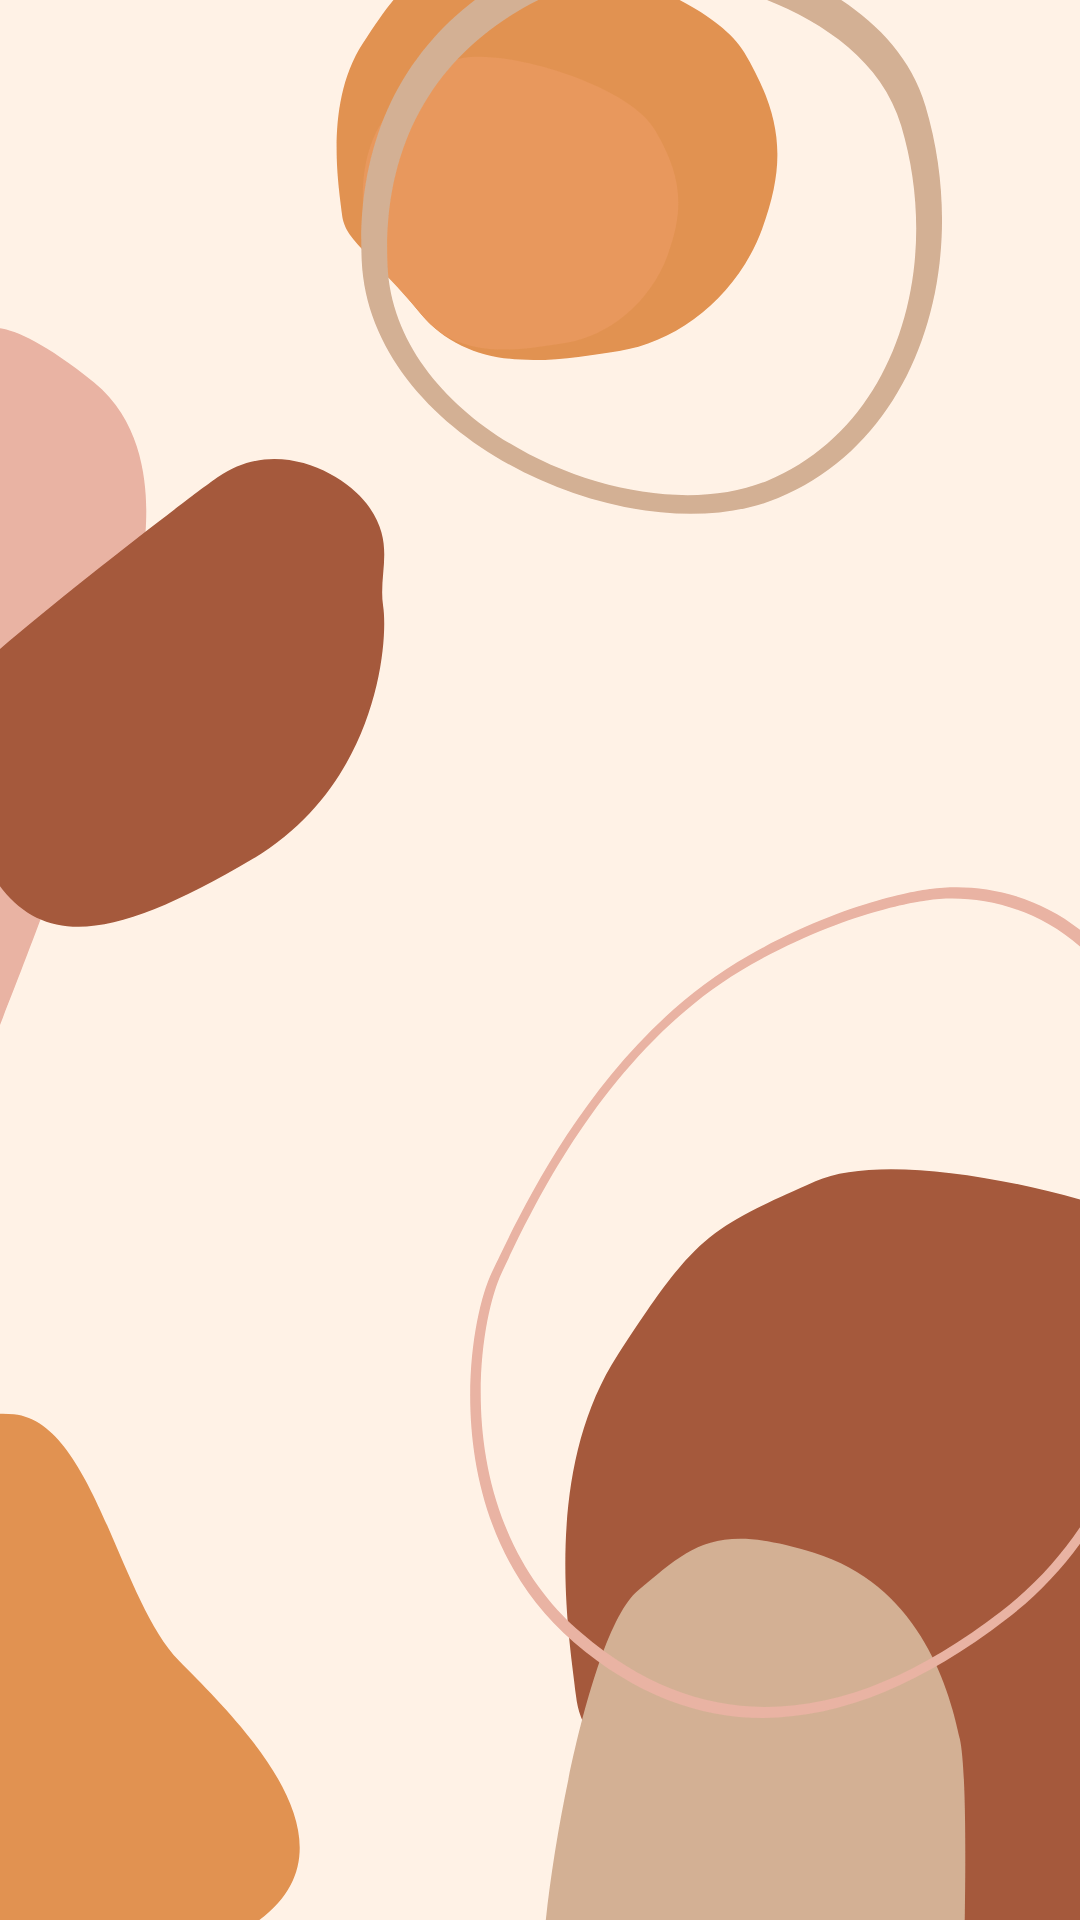 An image of abstract shapes in earthy tones against a light pink background. - Terracotta